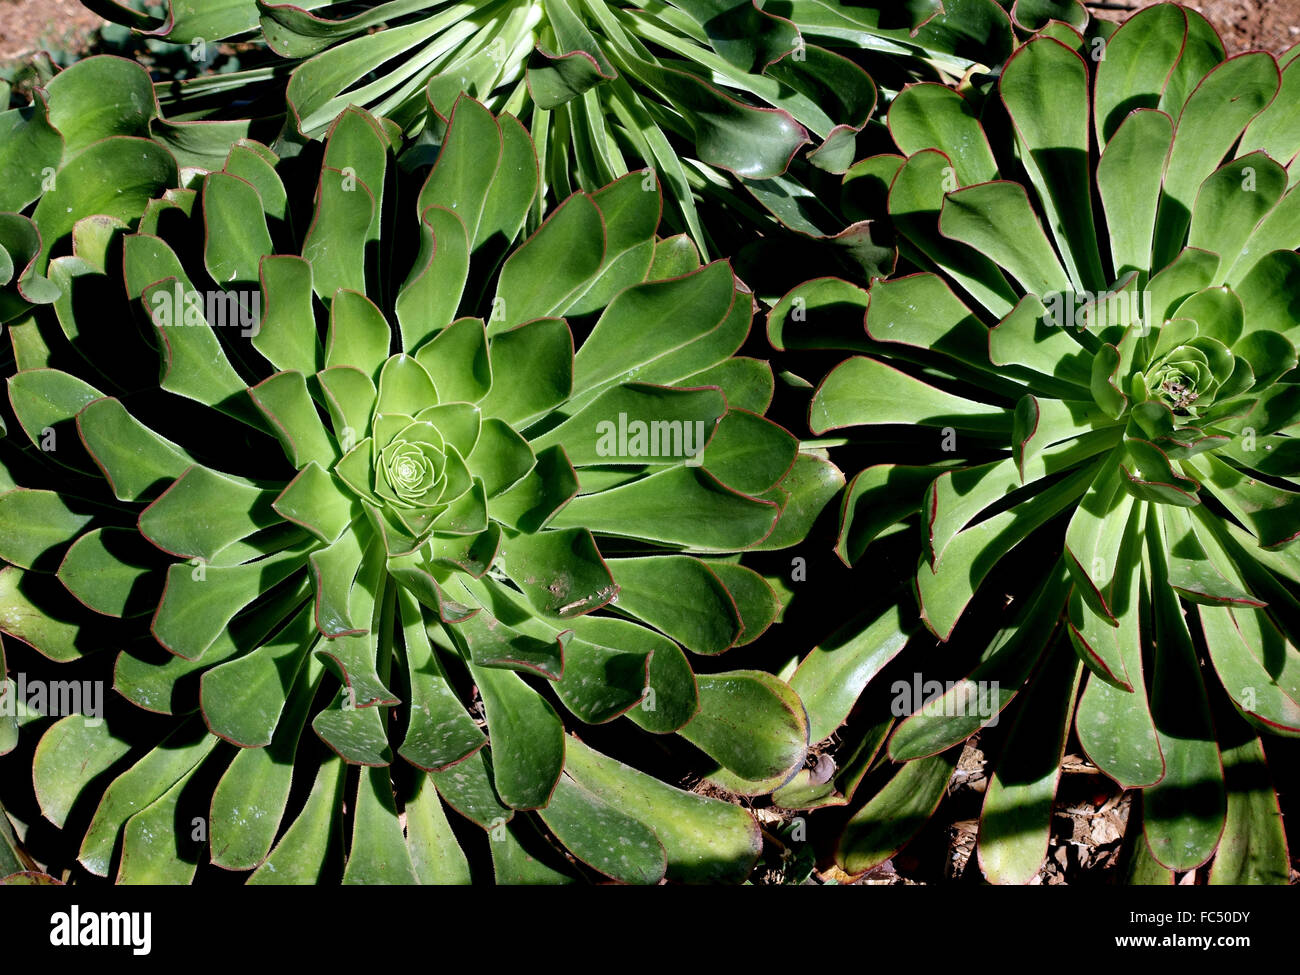 Aeonium Urbicum is a plant growing in rocky areas Stock Photo